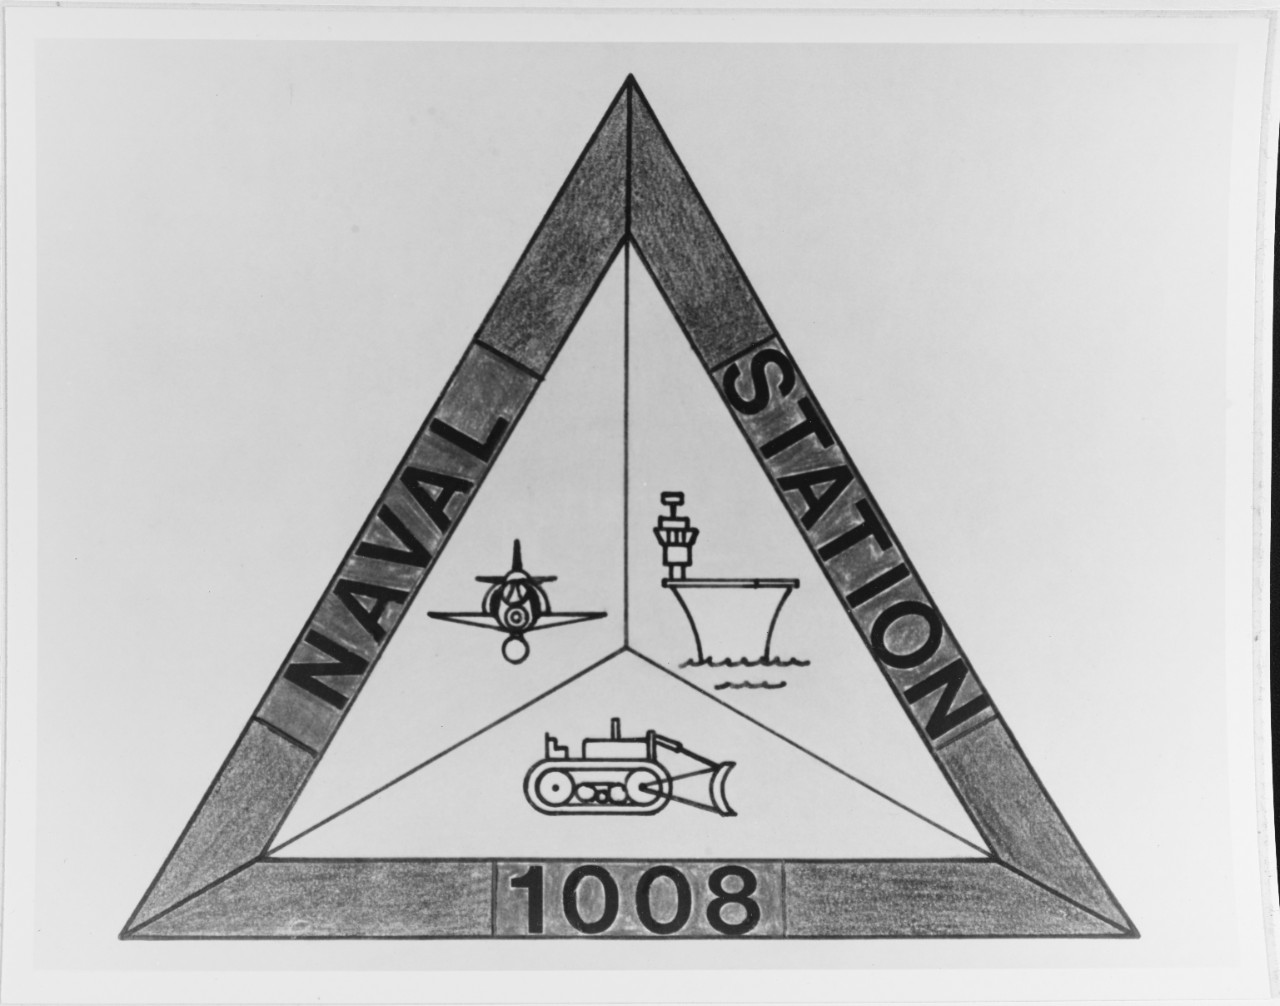 Insignia: Naval Station 1008